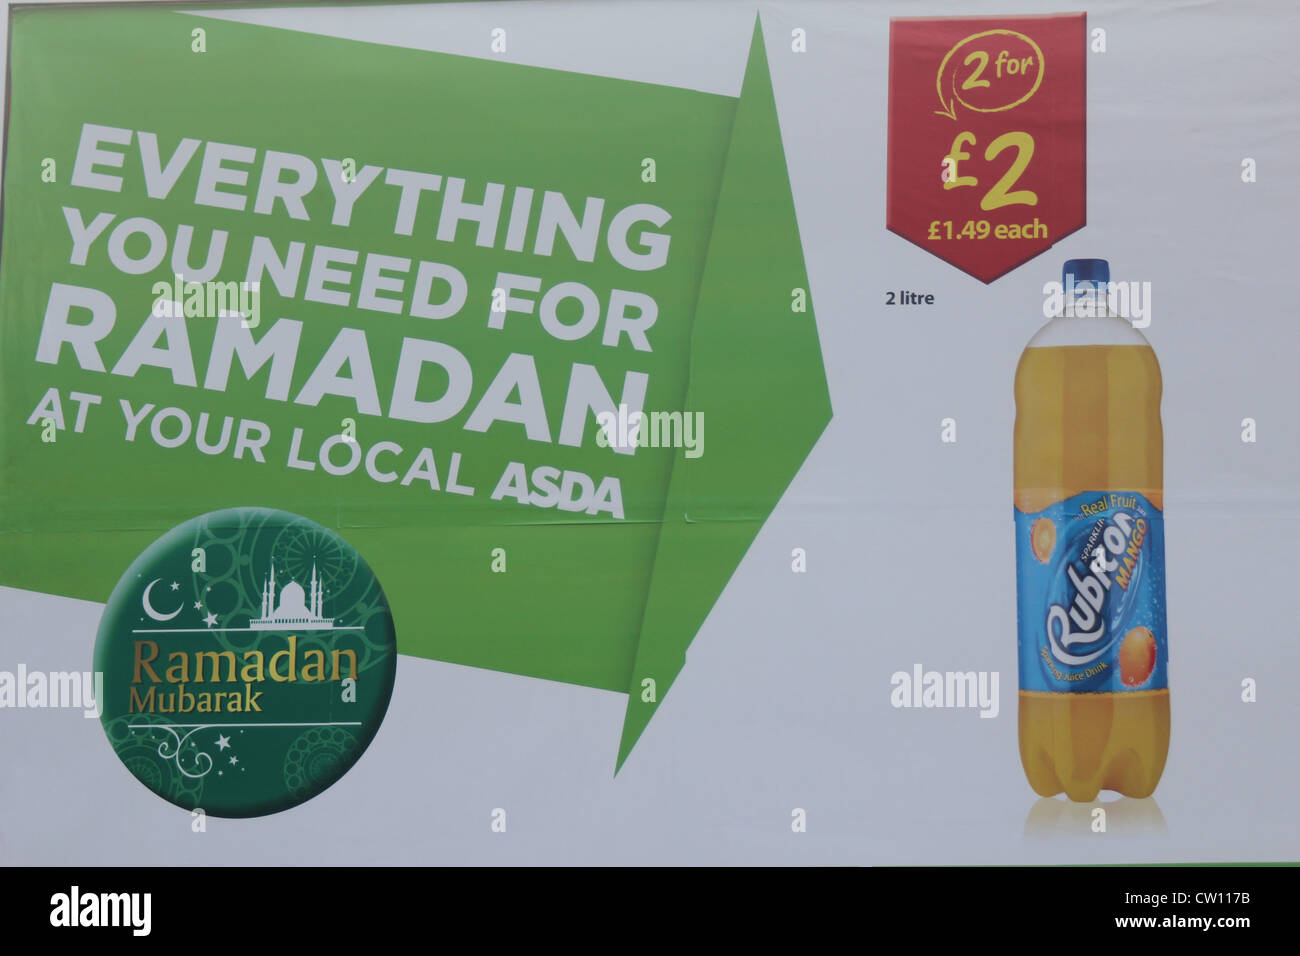 Advertising directed at the large local Muslim community of Birmingham, Ramadan food offers by British supermarket chain Asda. Stock Photo